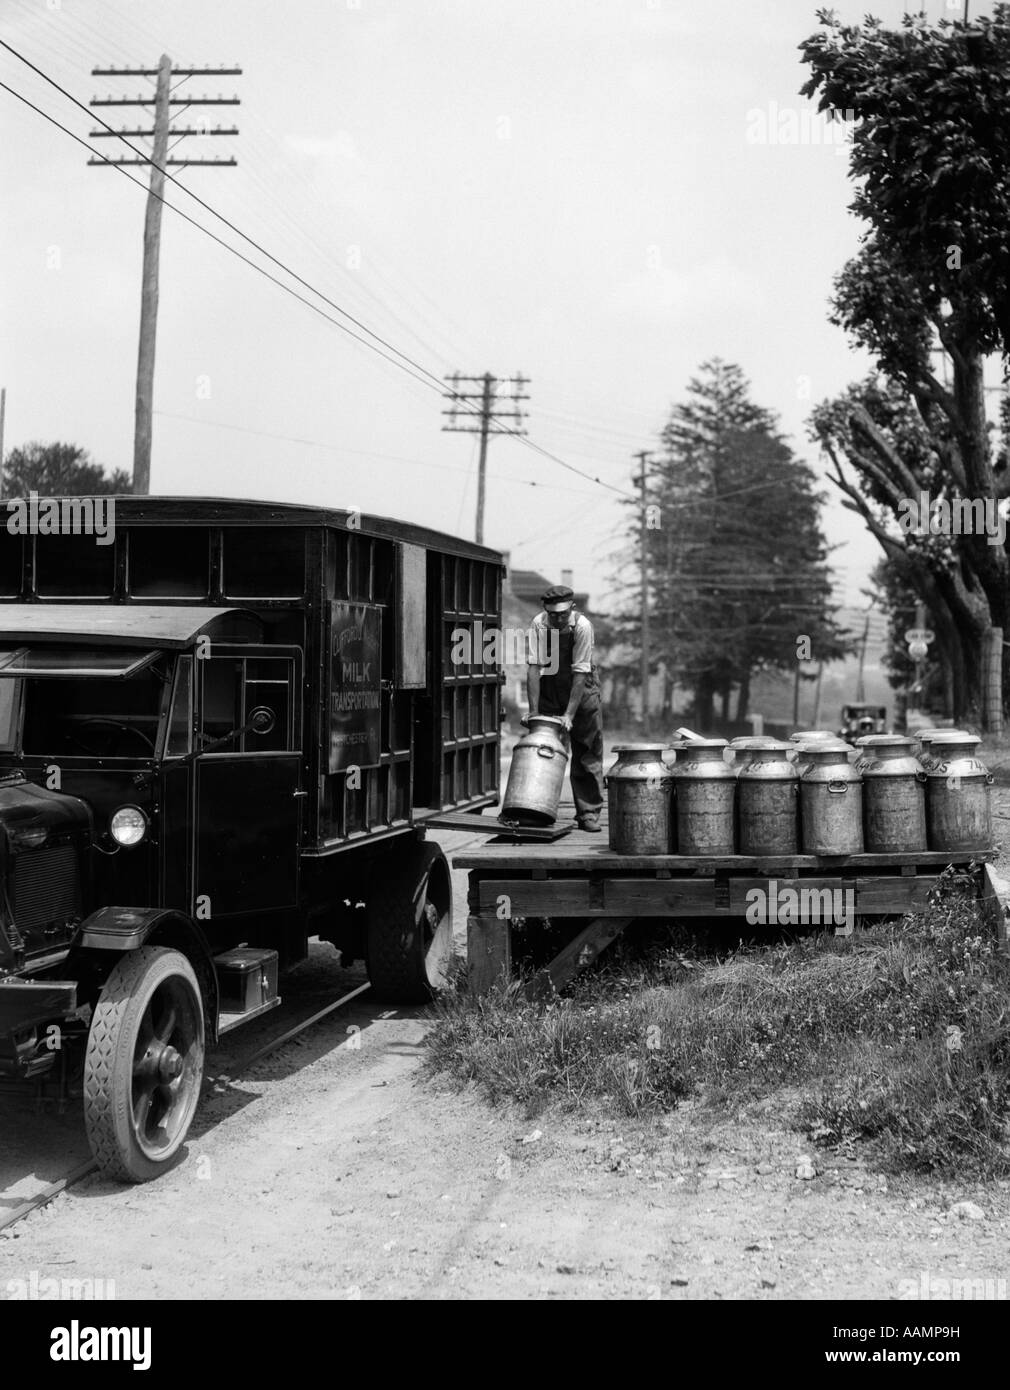 1920s DELIVERY MAN UNLOADING MILK CANS FROM LARGE TRUCK ONTO WOODEN PLATFORM ALONG SIDE OF ROAD Stock Photo